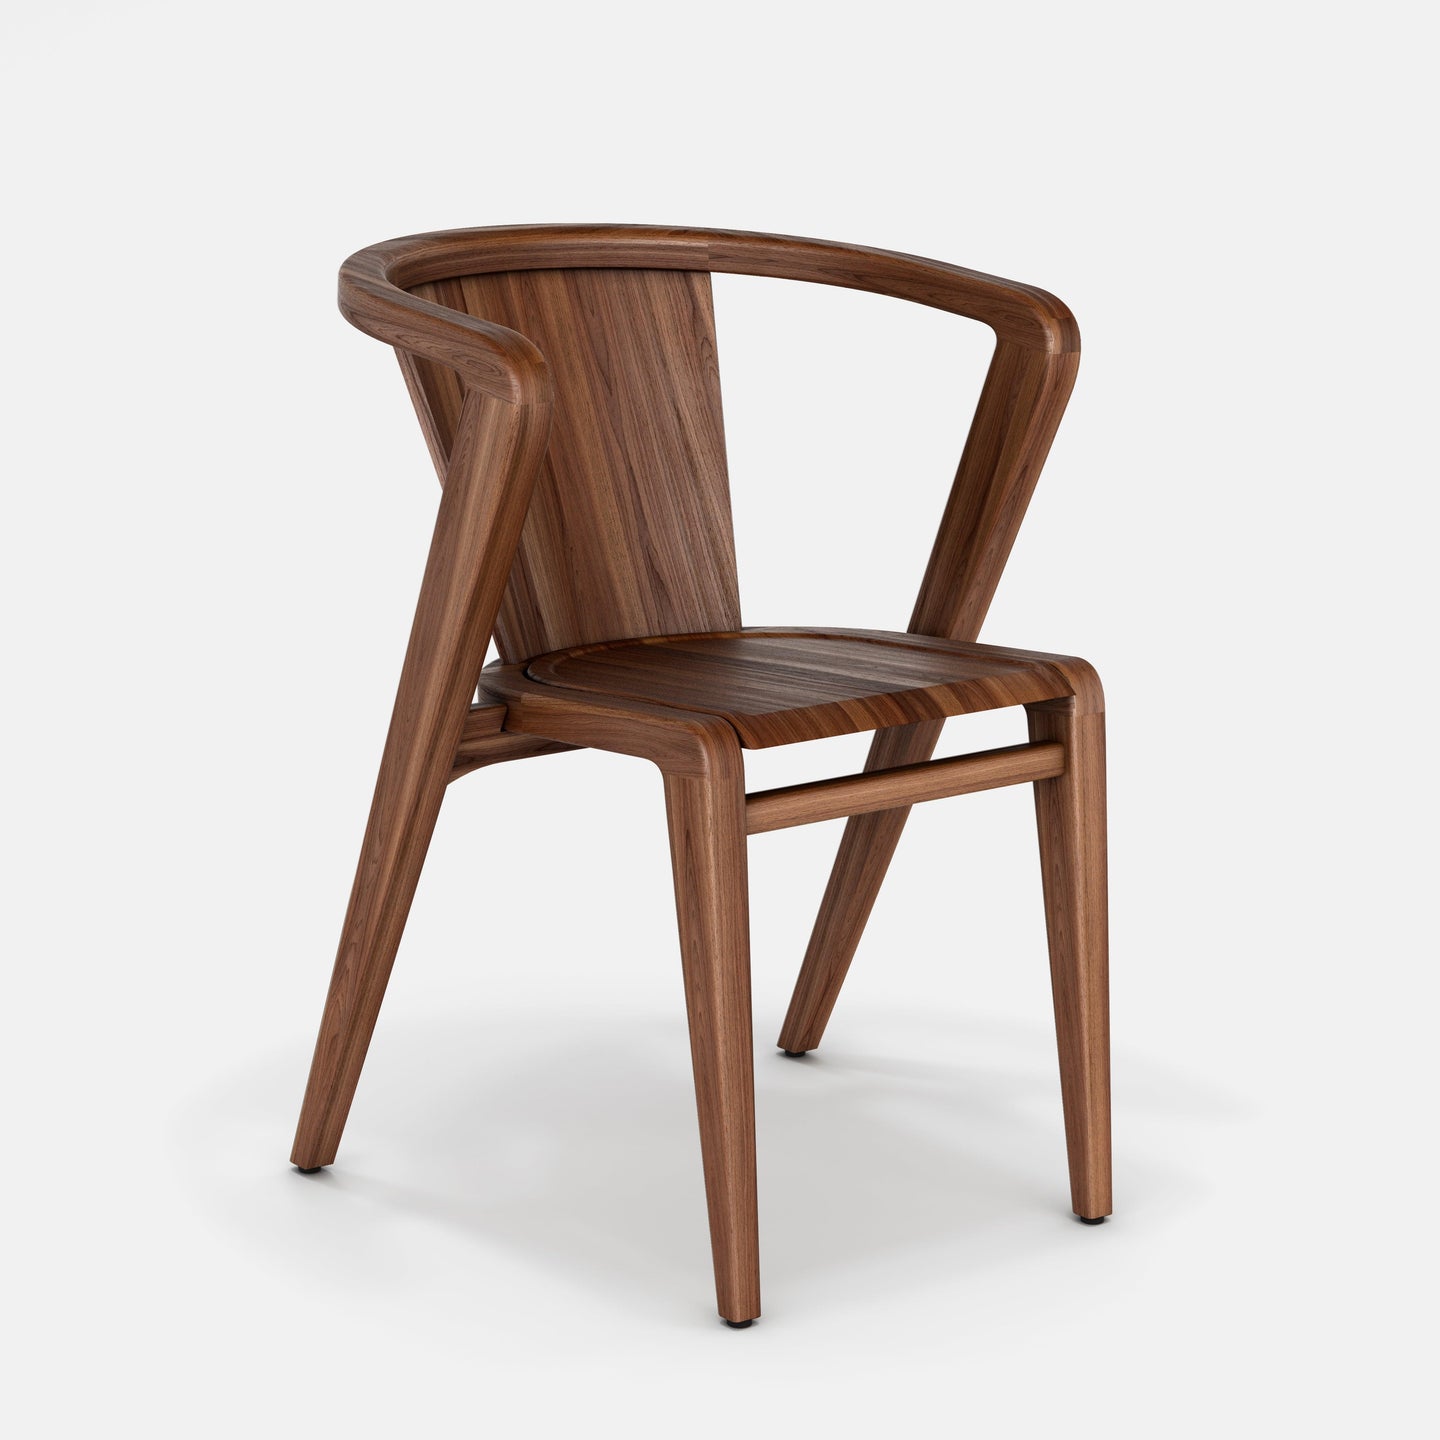 Portuguese ROOTS Chair | All Wood | Award Winning Design - AROUNDtheTREE